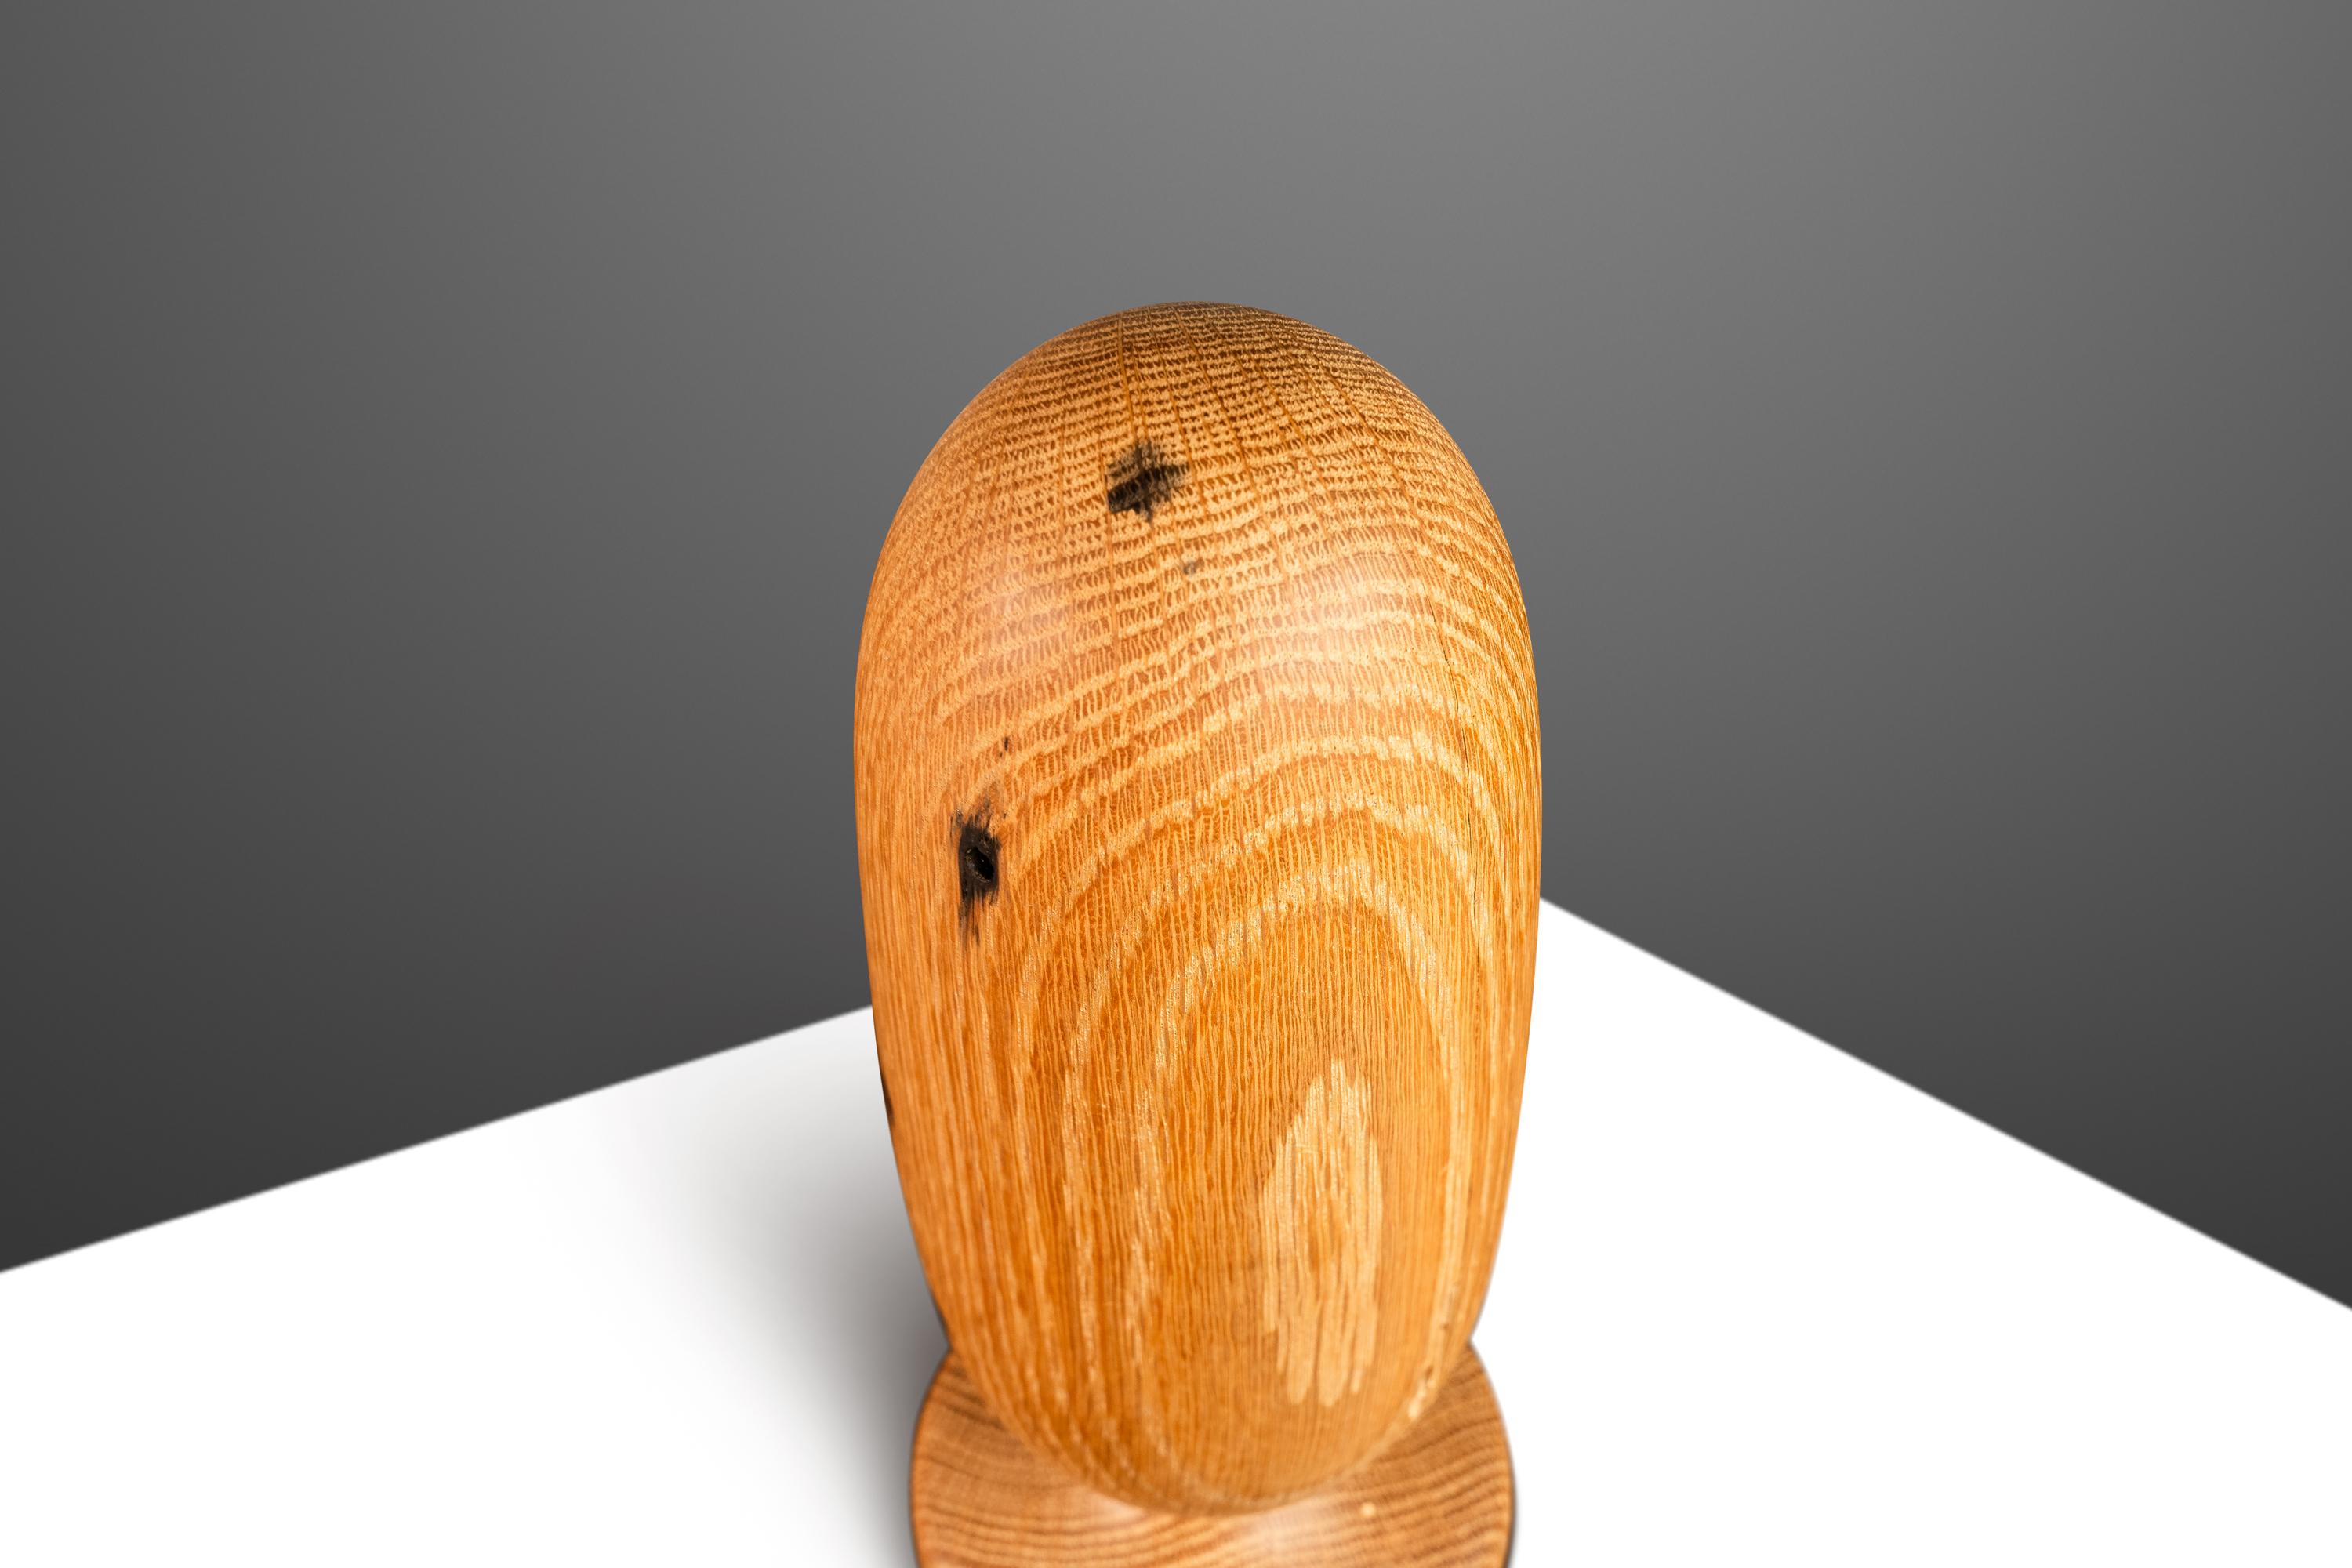 Organic Modern Sculpture in Solid White Oak by Mark Leblanc, USA, c. 2023 For Sale 8